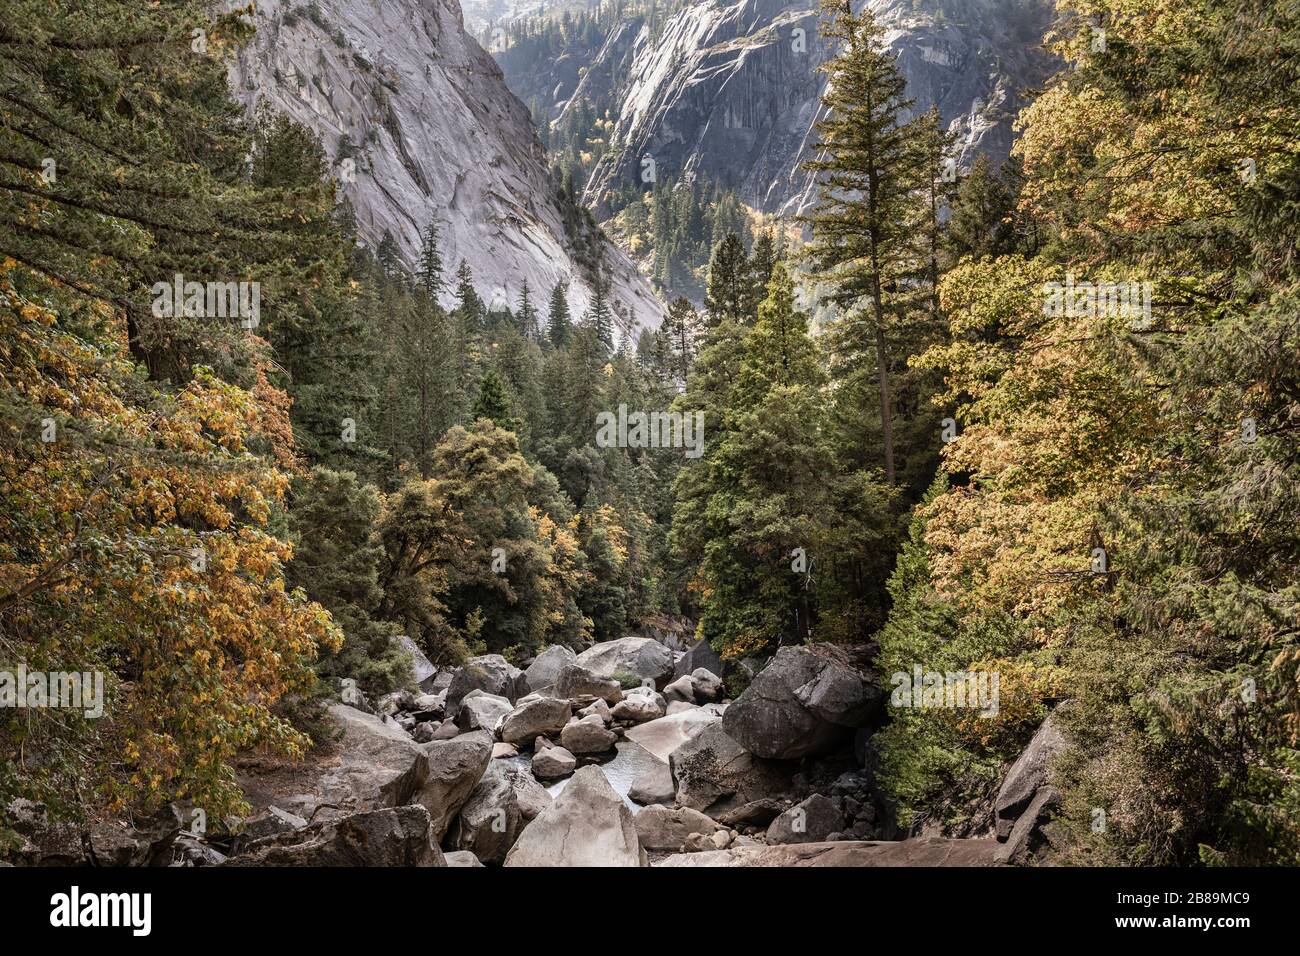 dry view of the rocky base from the Vernal Falls Bridge, Yosemite NP Stock Photo